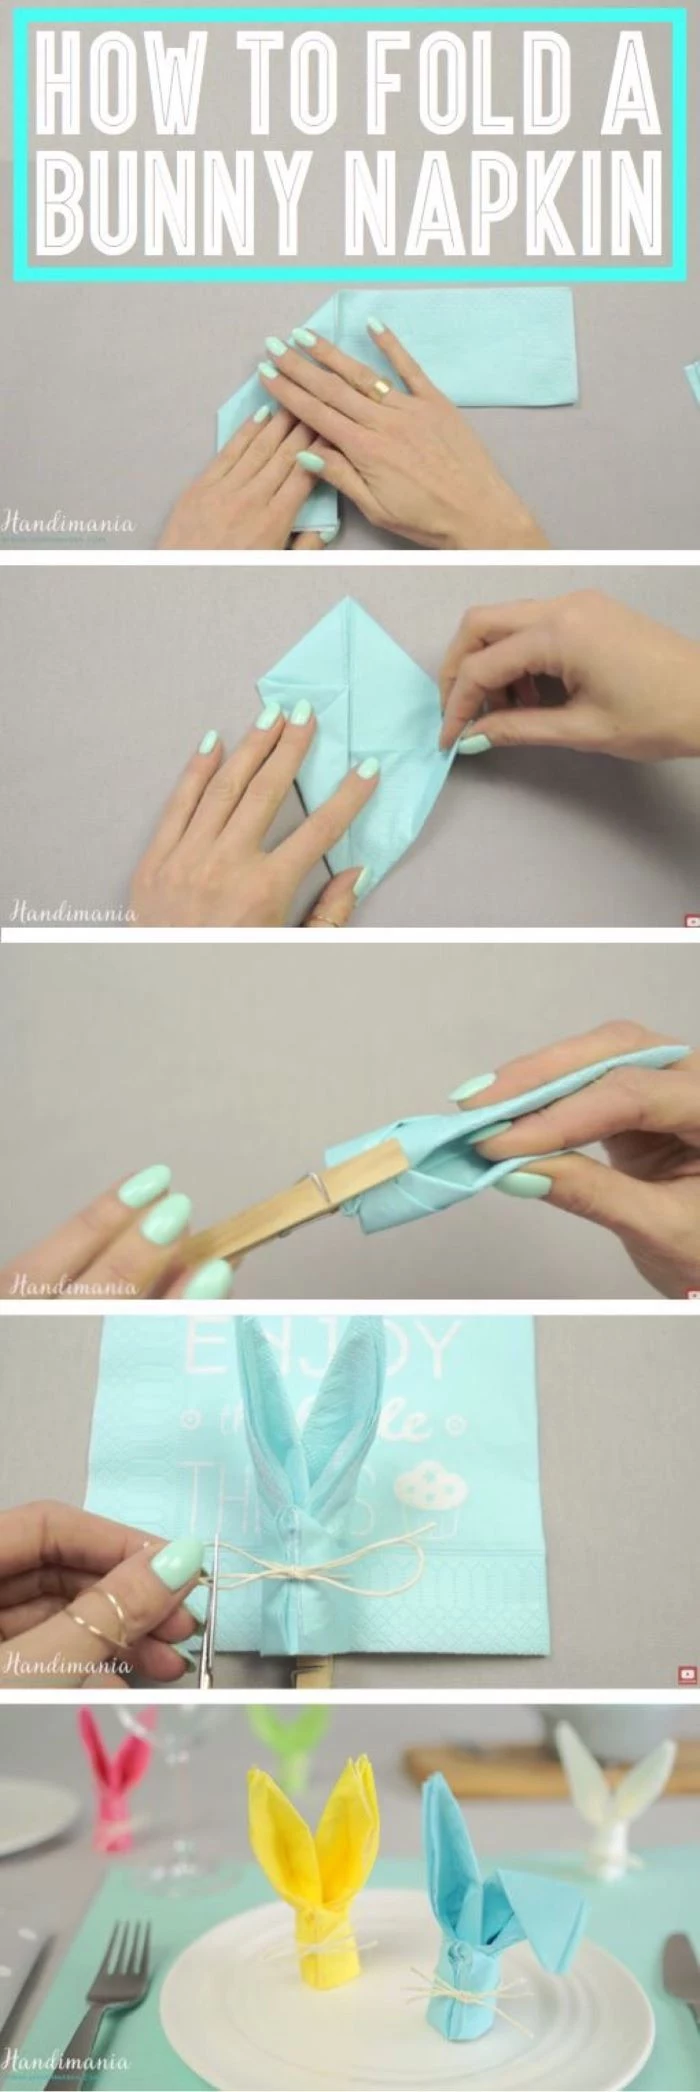 how to fold a bunny napkin, easter table decorations, step by step diy tutorial, blue napkin